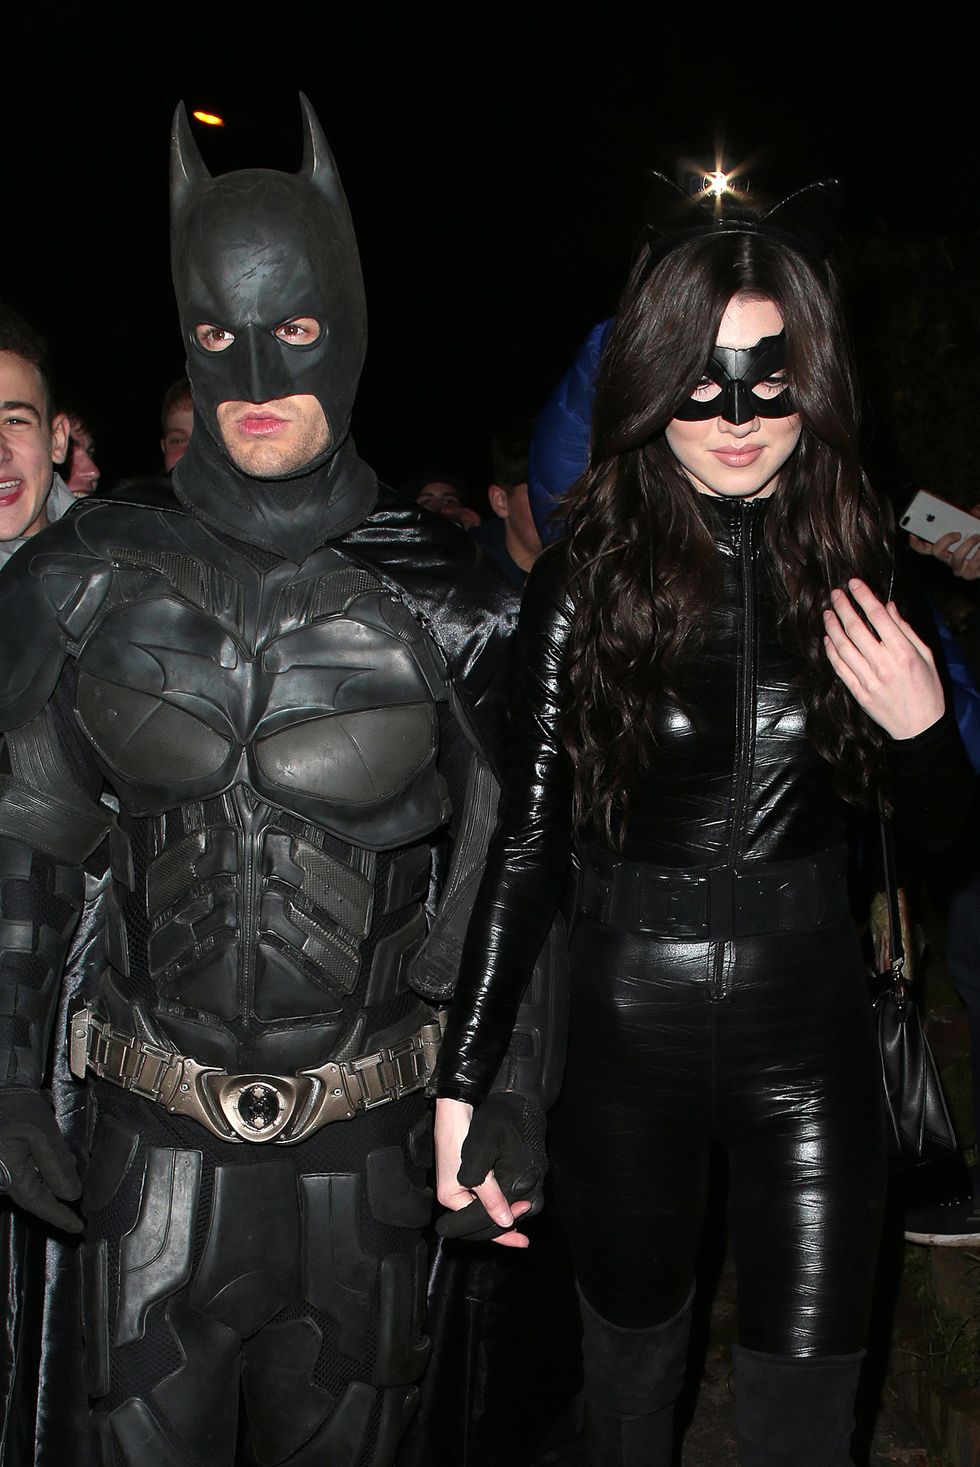 This year's 20 most popular celebrity Halloween costume ideas